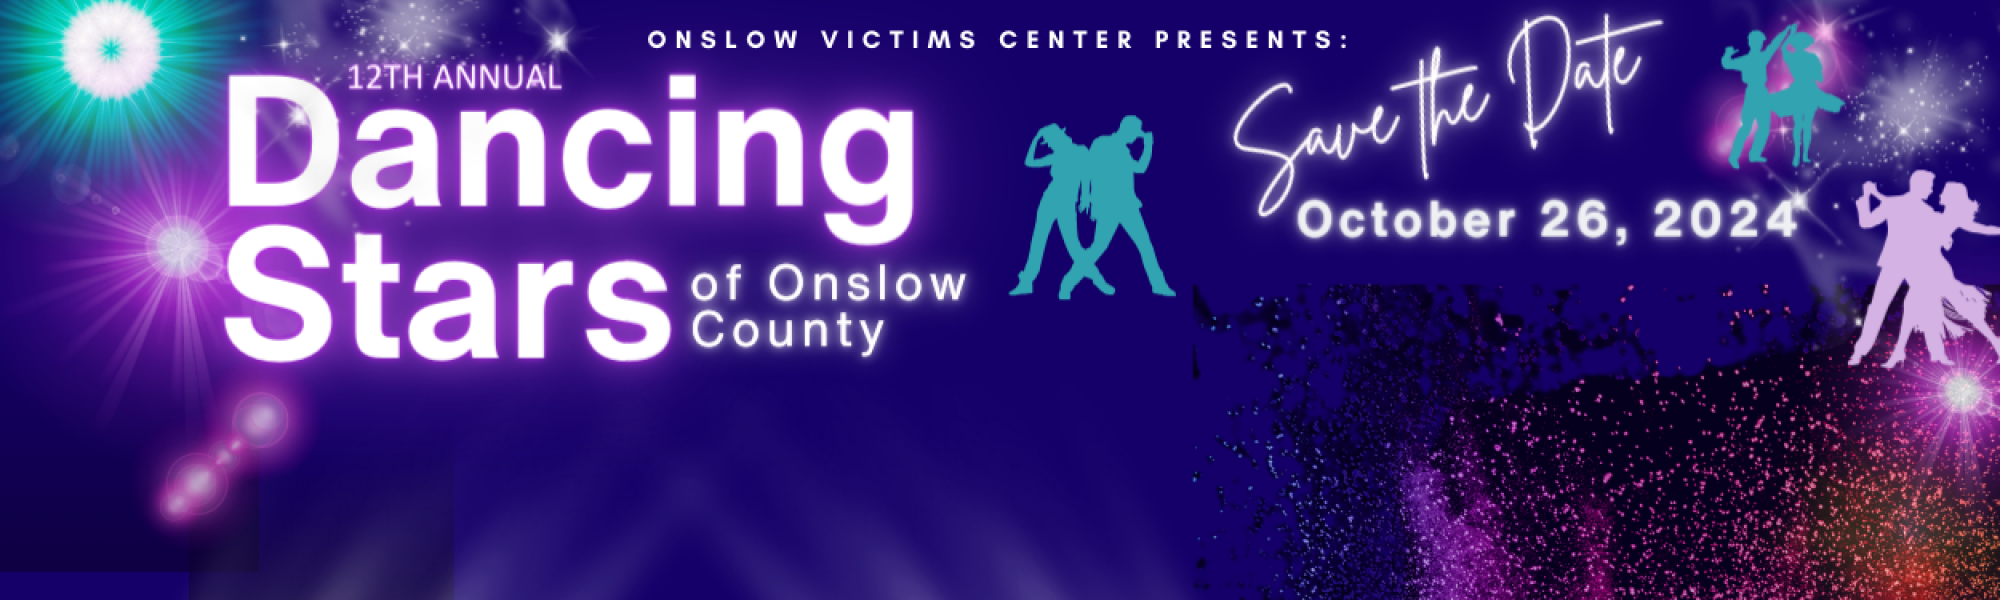 Dancing Stars of Onslow County